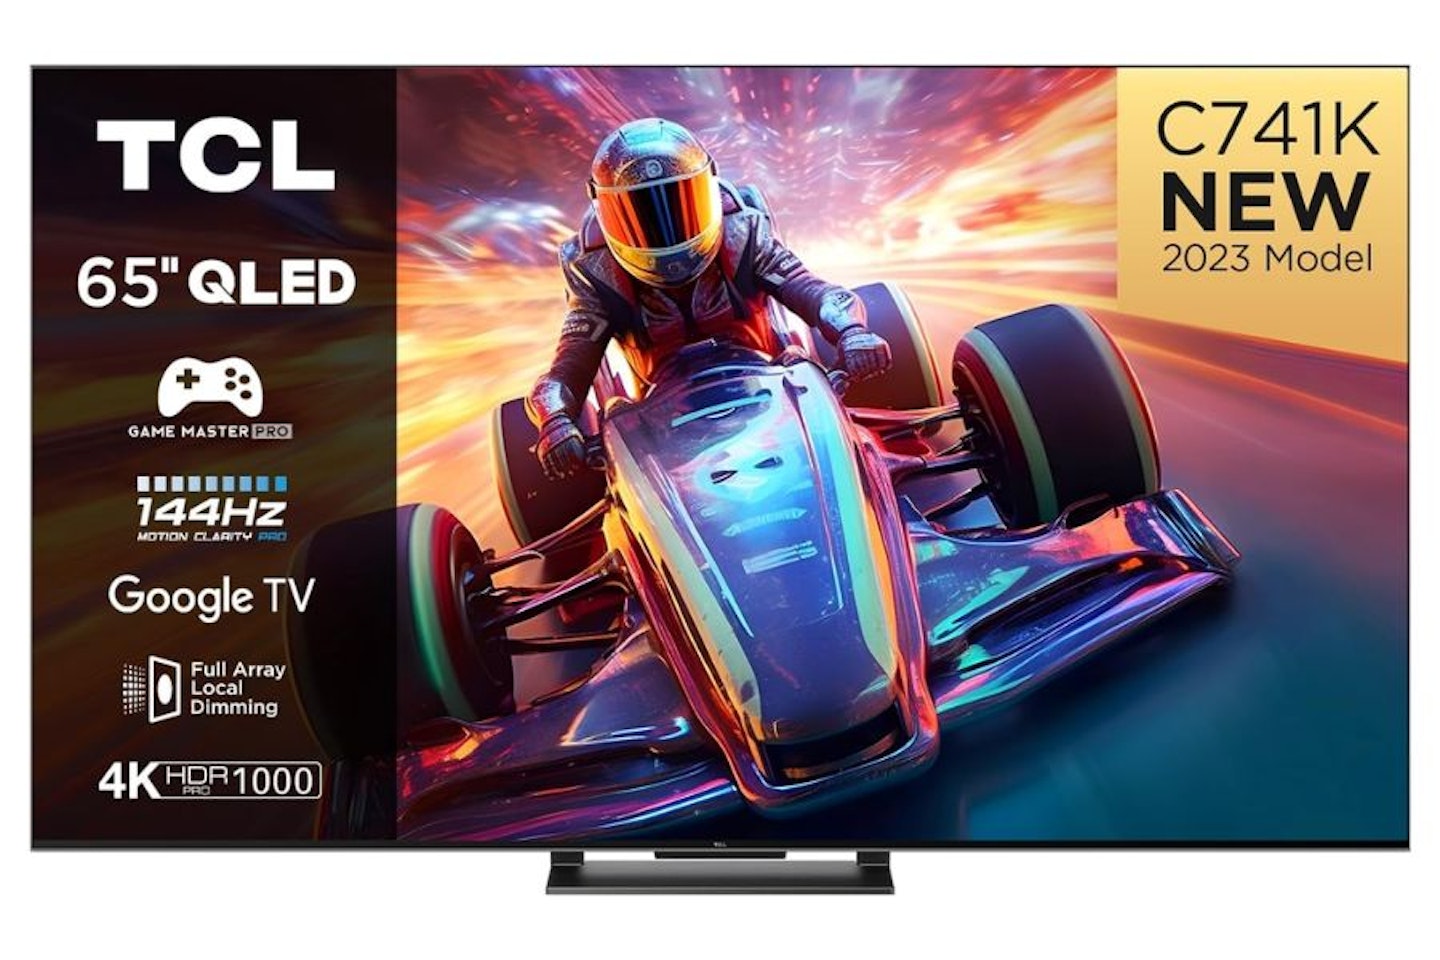 TCL 65C741K 65-inch QLED Television